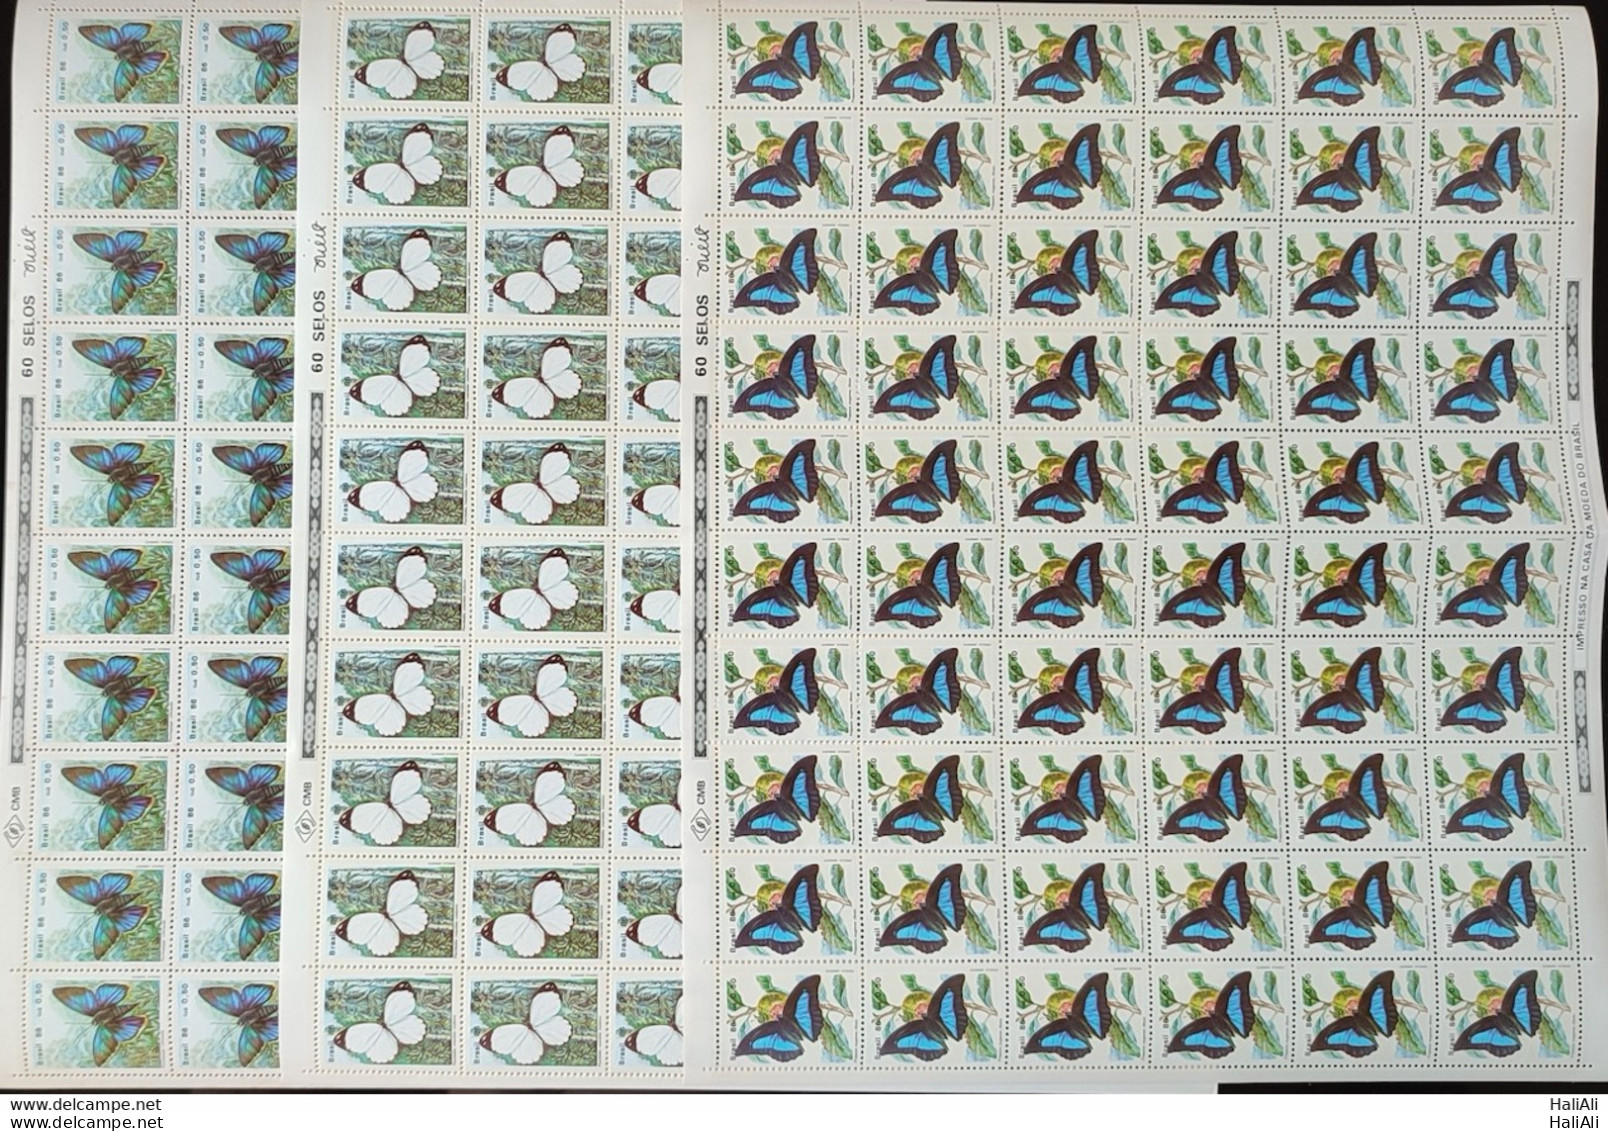 C 1512 Brazil Stamp Butterfly Insects 1986 Sheet Complete Series.jpg - Nuovi